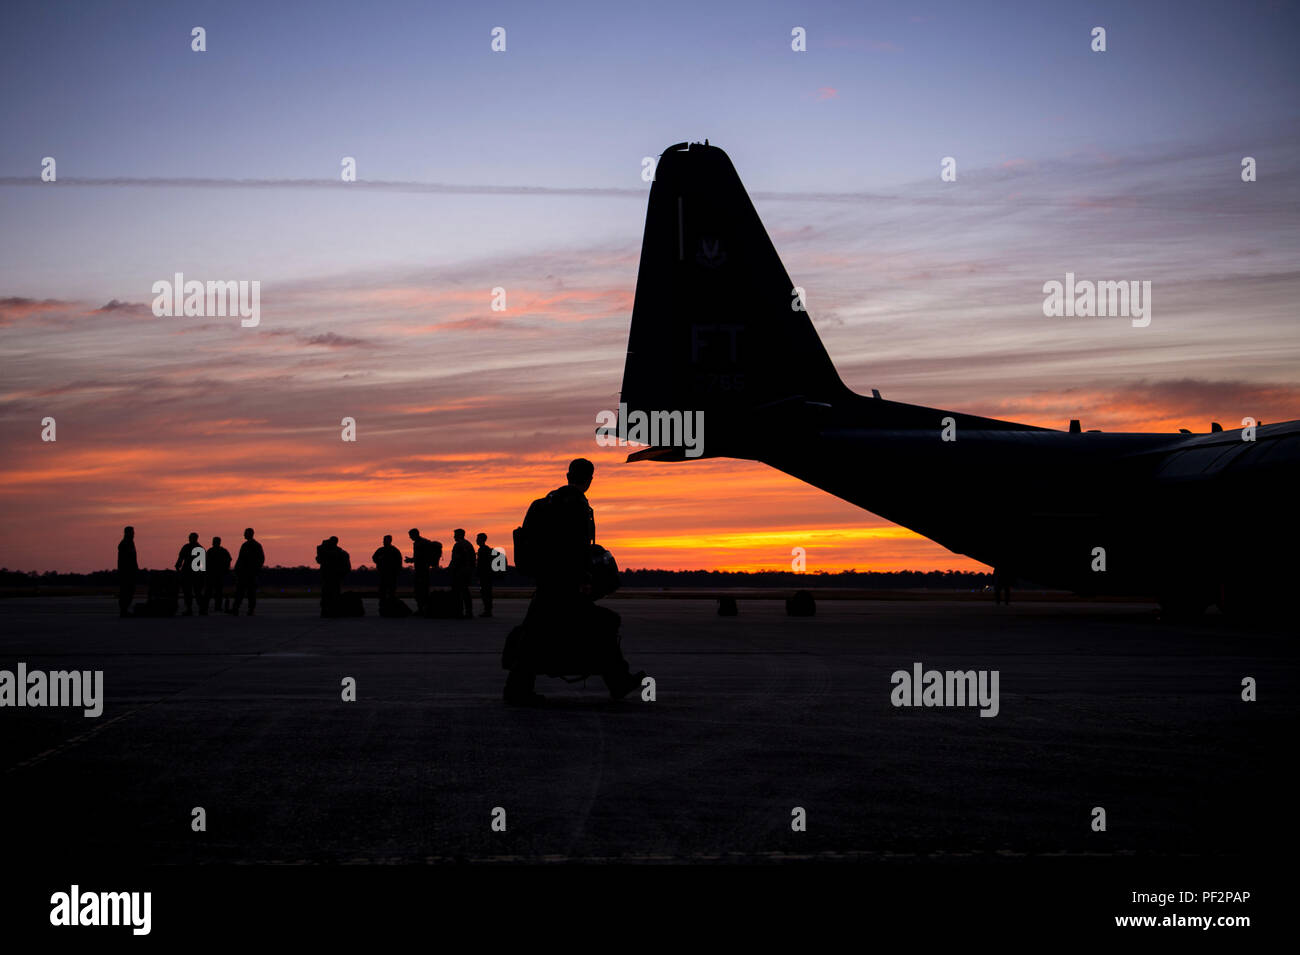 Aircrew from the 71st Rescue Squadron and jumpers from the 93d Air Ground Operations Wing prepare to board an HC-130J Combat King II, Feb. 17, 2016, at Moody Air Force Base, Ga.  Multiple U.S. Air Force aircraft within Air Combat Command conducted joint aerial training at Grand Bay Bombing and Gunnery Range. During the training, the aircraft conducted tactical air and ground maneuvers, as well as weapons training. (U.S. Air Force photo by Senior Airman Ryan Callaghan/Released) Stock Photo